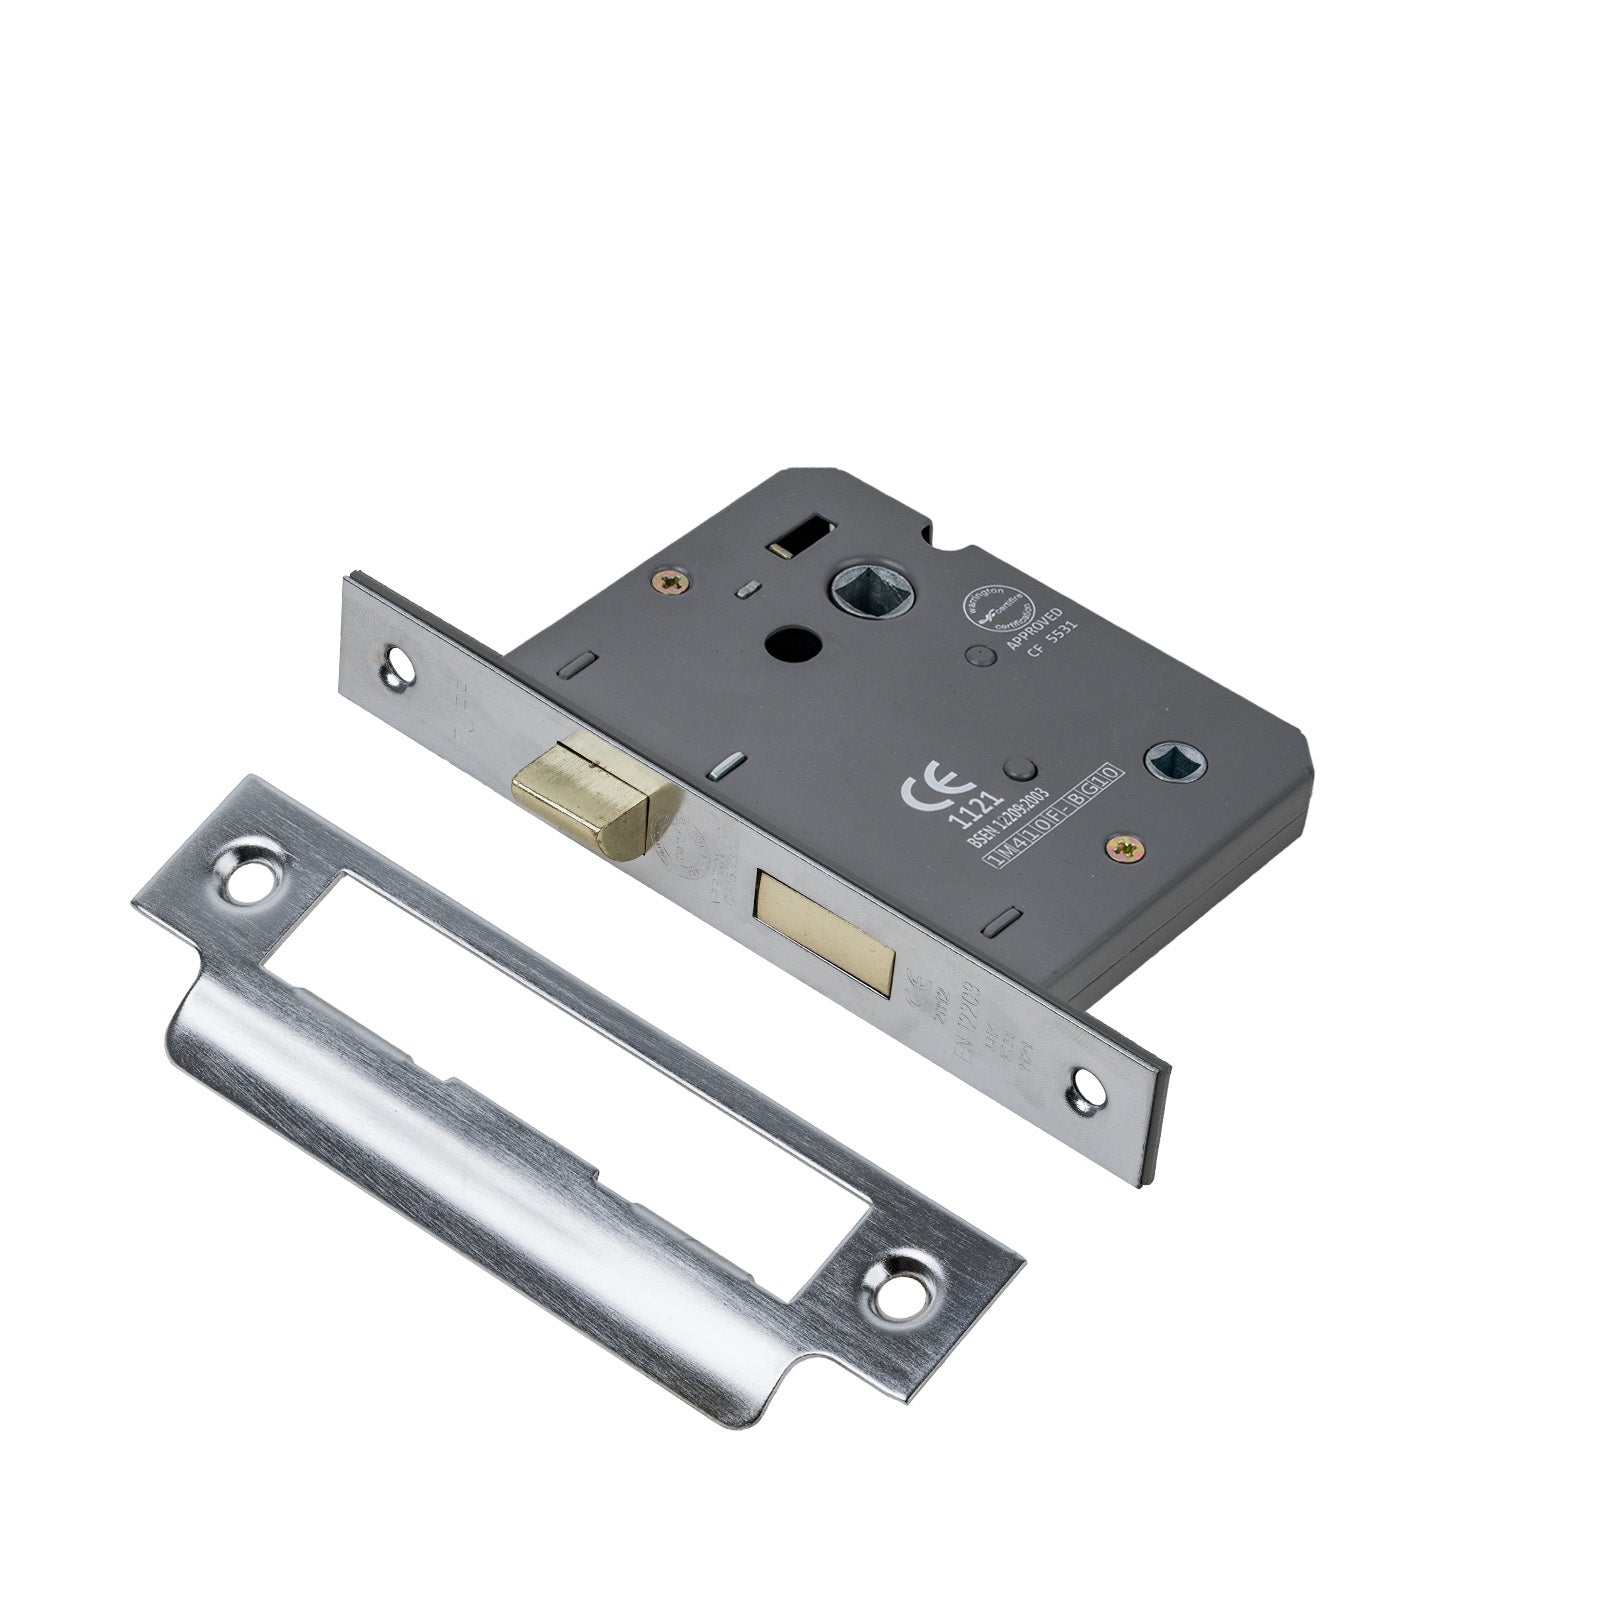 SHOW Bathroom Sash Lock - 3 Inch with Satin Chrome finished forend and striker plate